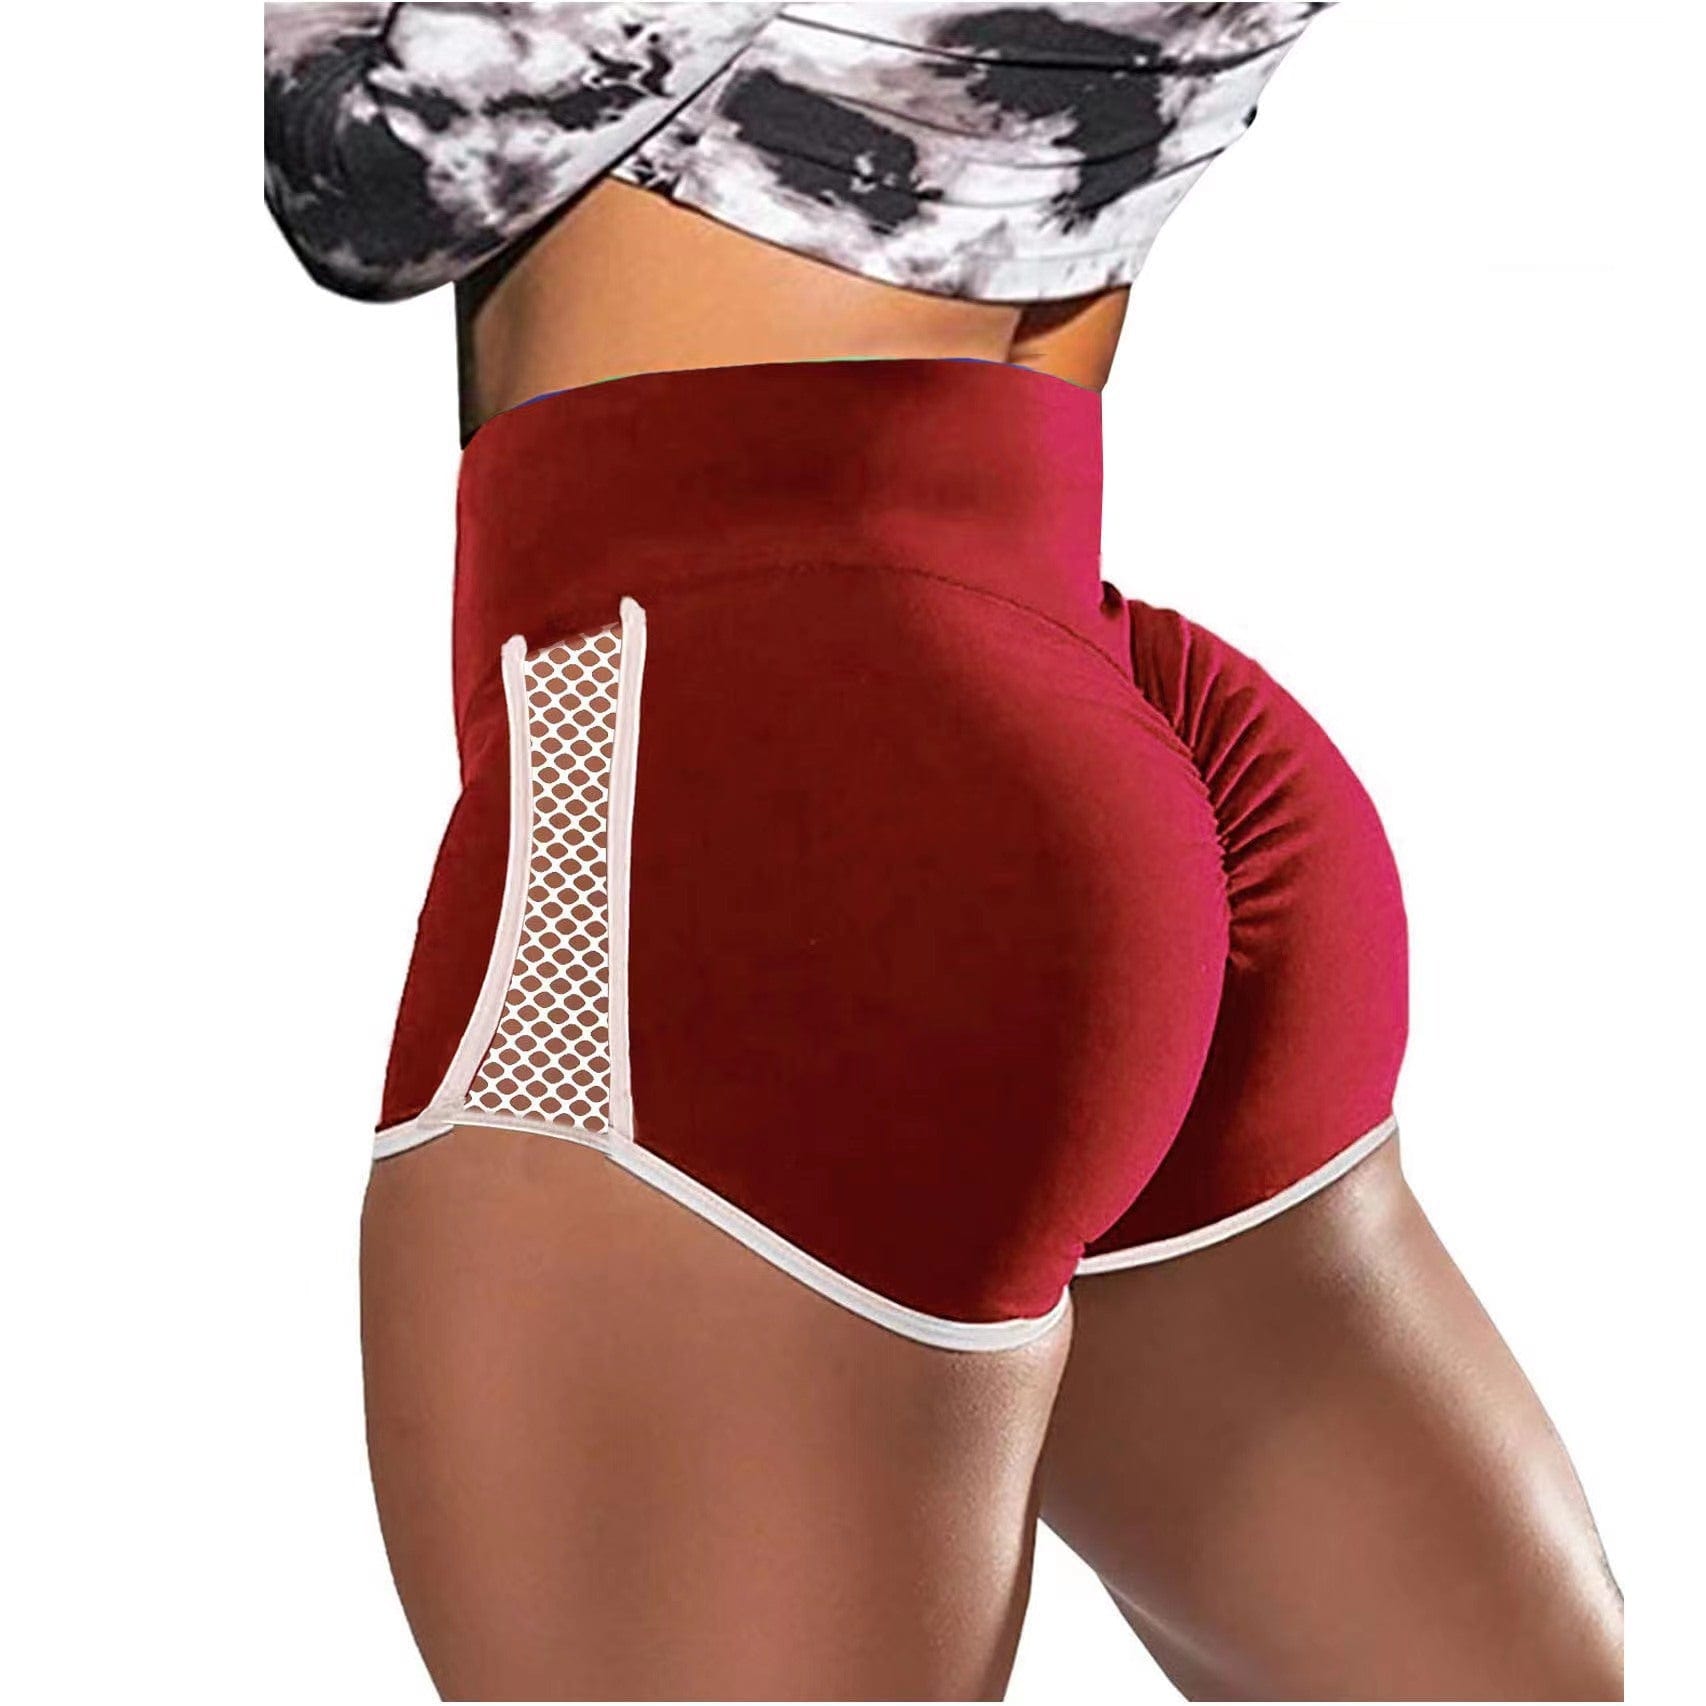 ALLRJ Wine Red / L Cross-border European And American Foreign Trade Shorts High Waist Shaping Shorts Fitness Sports Pants Hollow Out Stitching Shorts